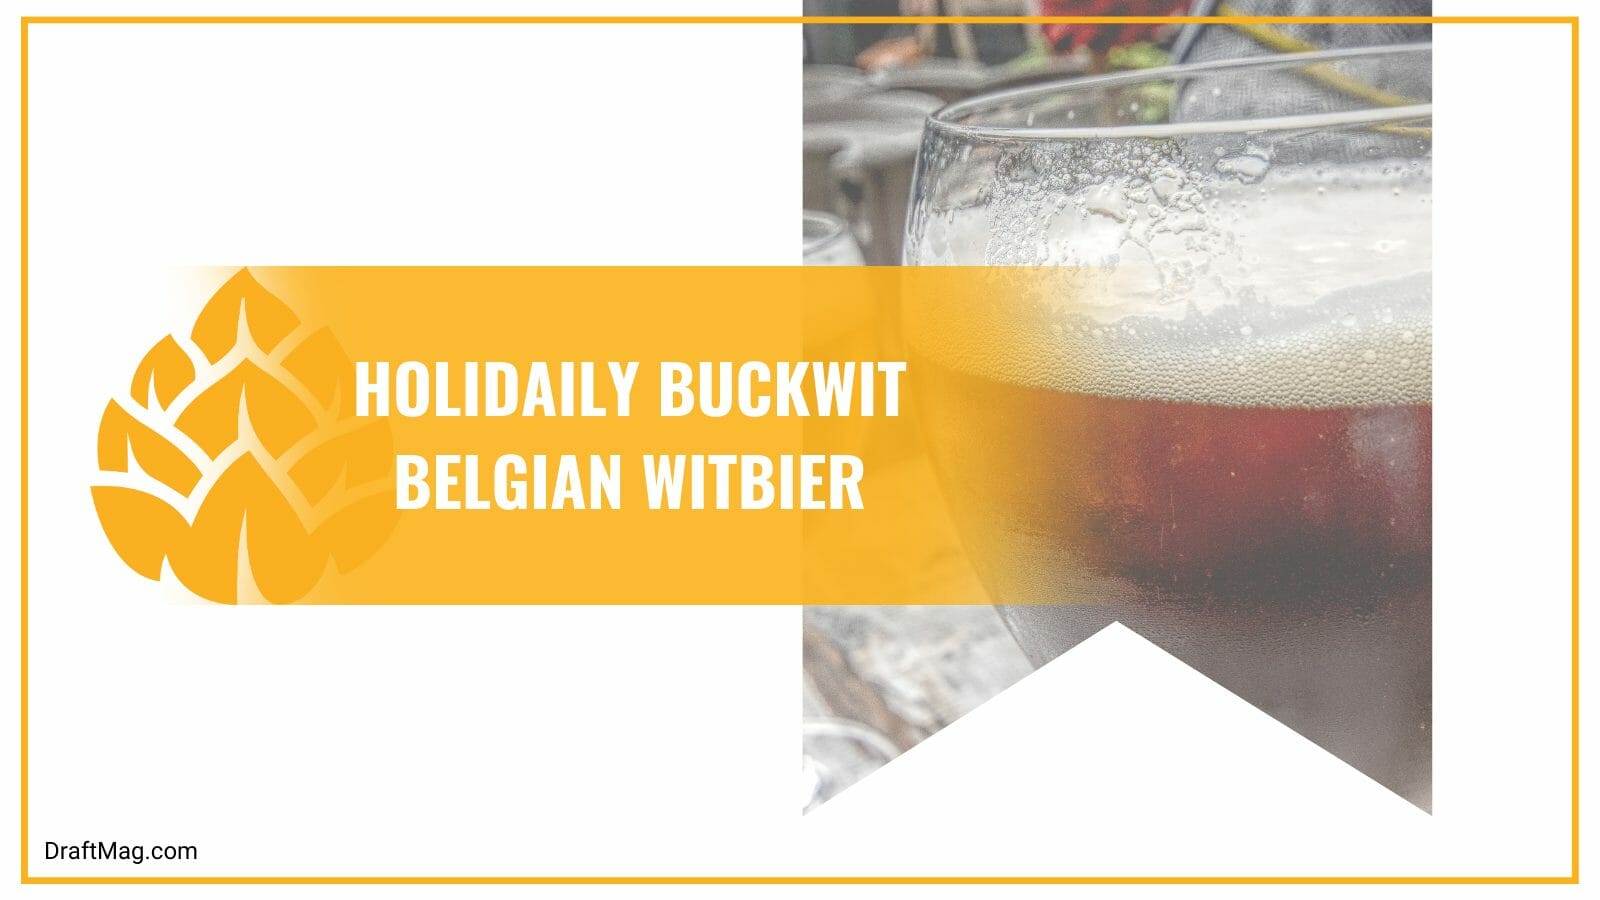 Holidaily buckwit belgian witbier